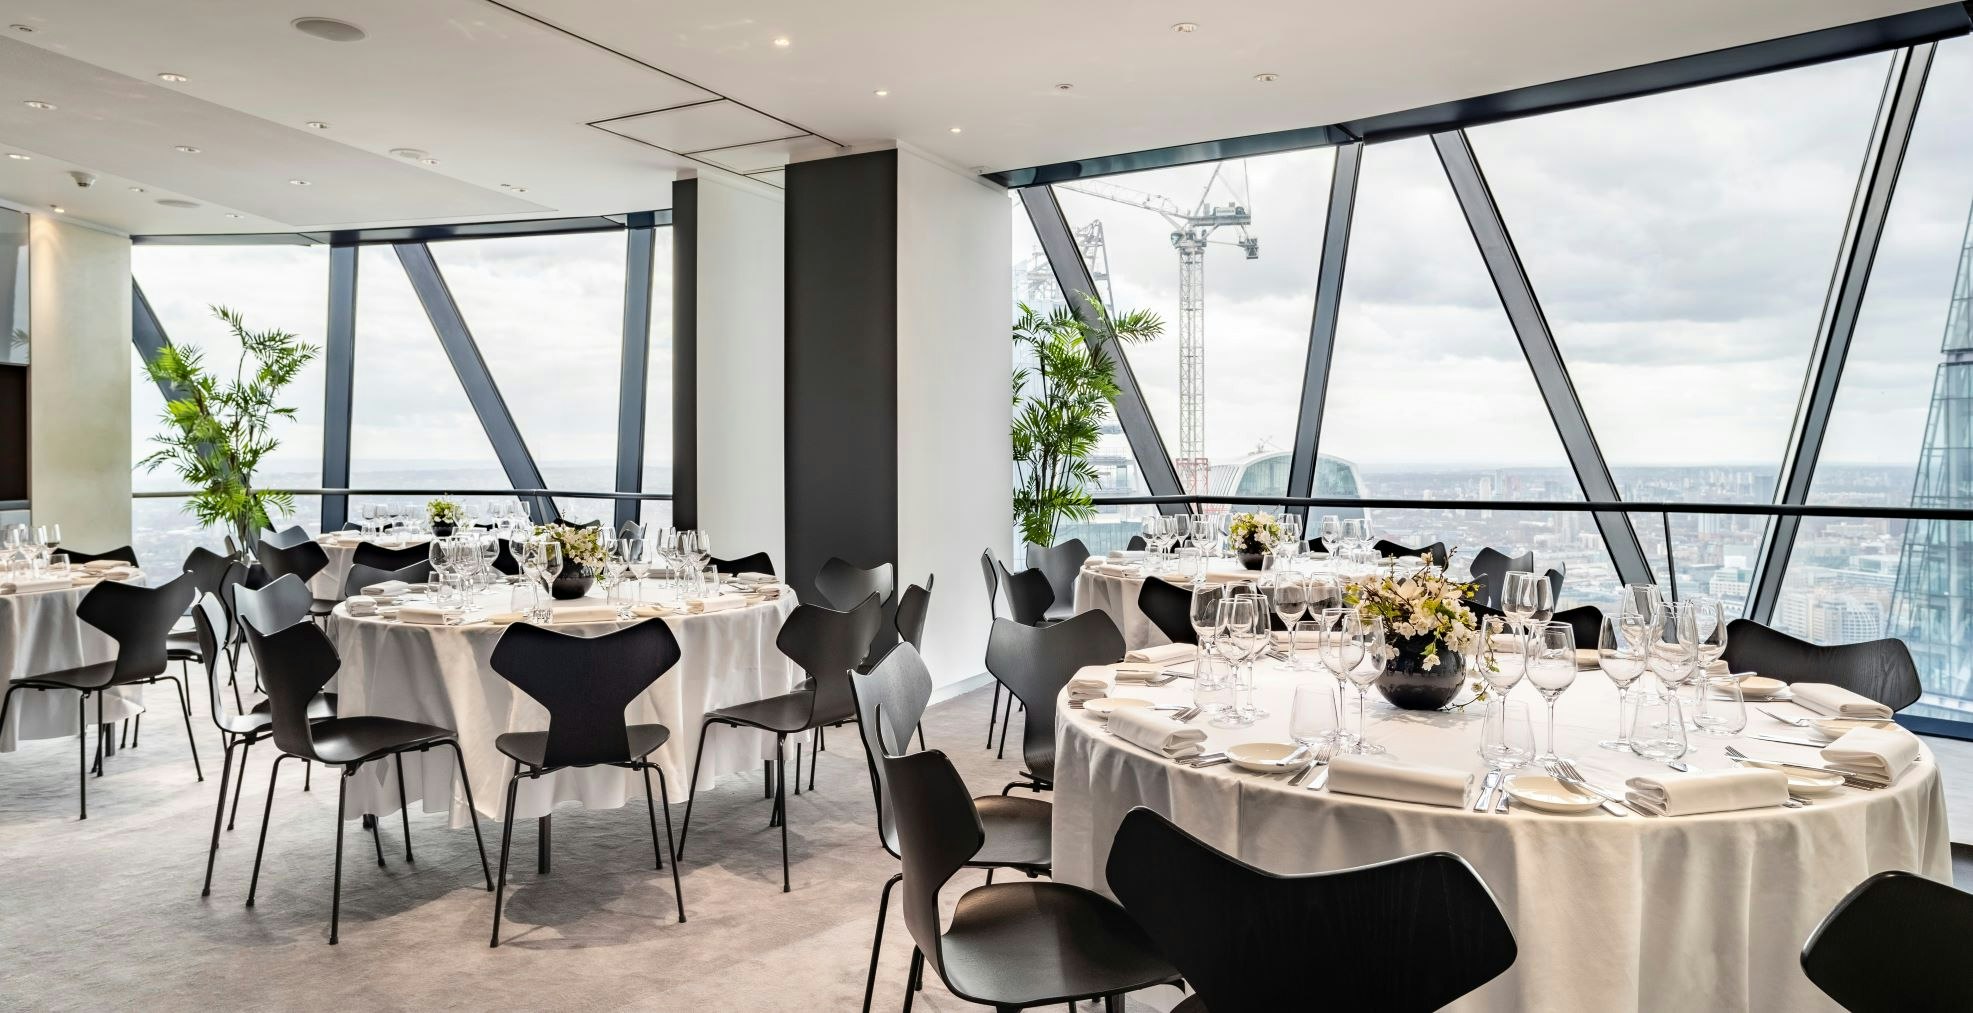 Outdoor Birthday Party Venues in London - Searcys at the Gherkin